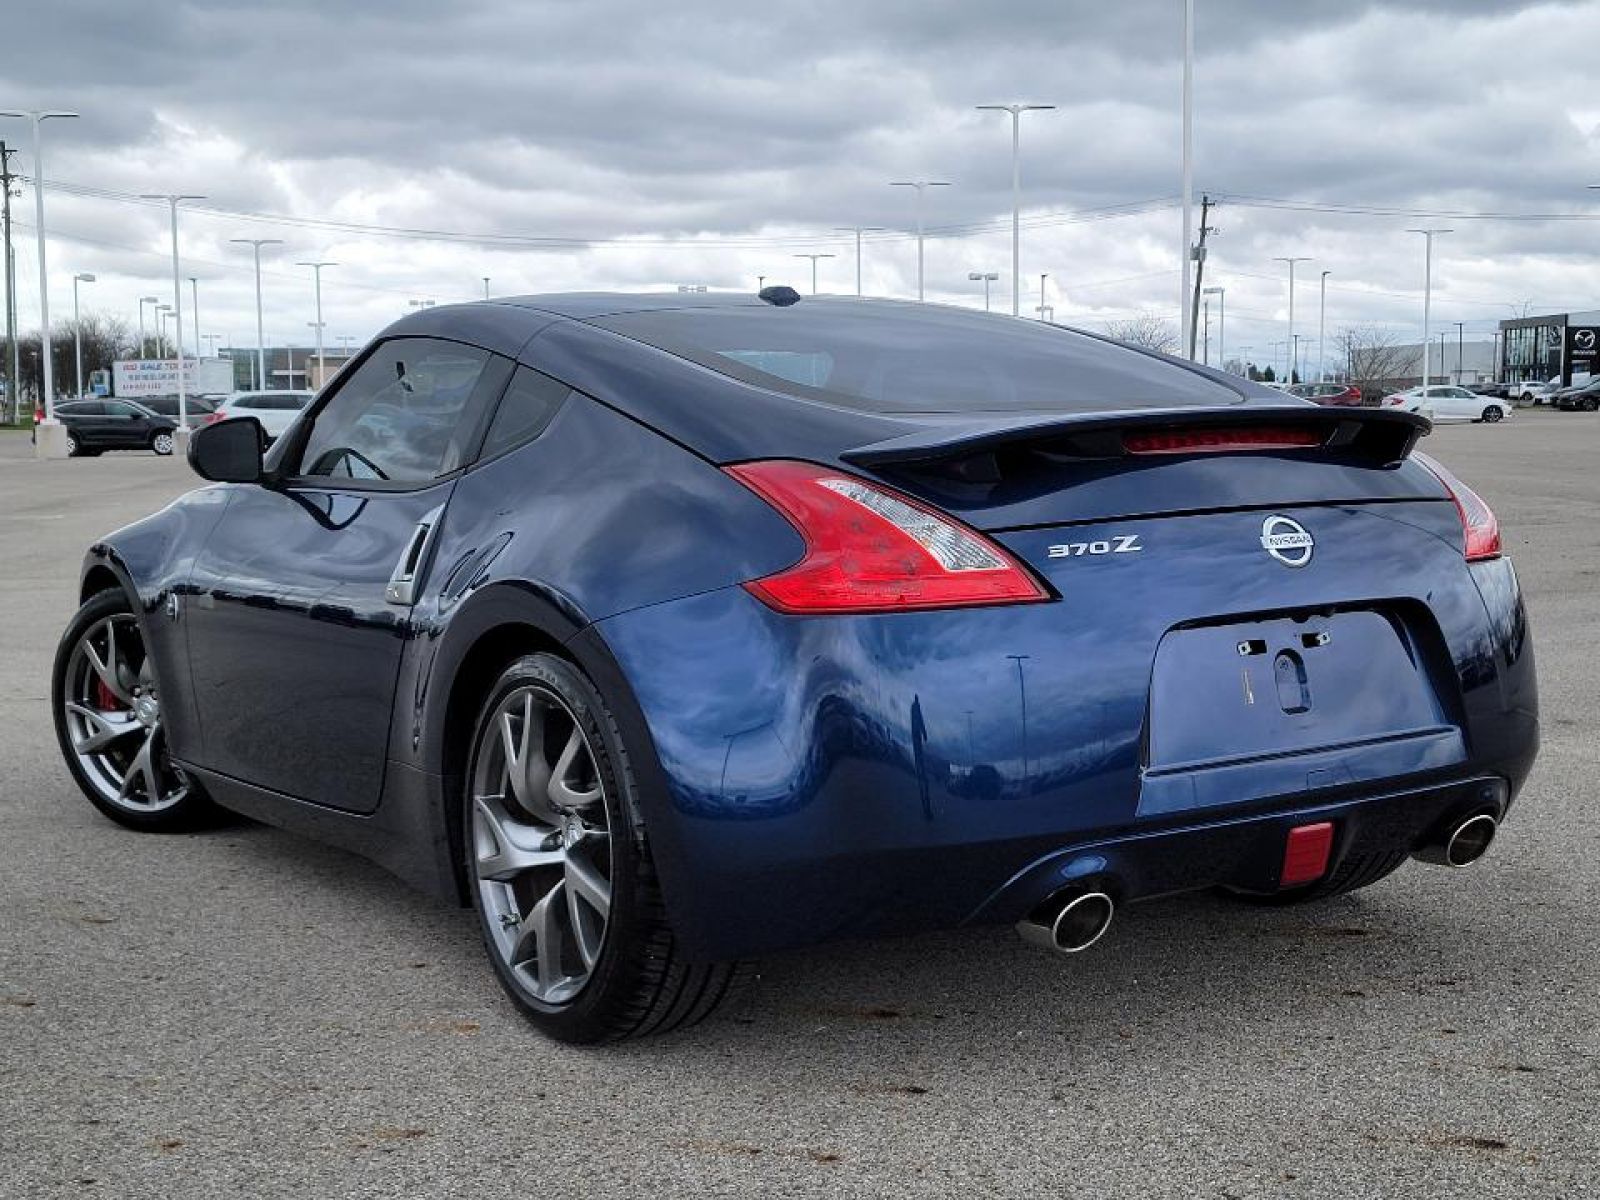 Used, 2014 Nissan 370Z Touring, Other, P0512-9